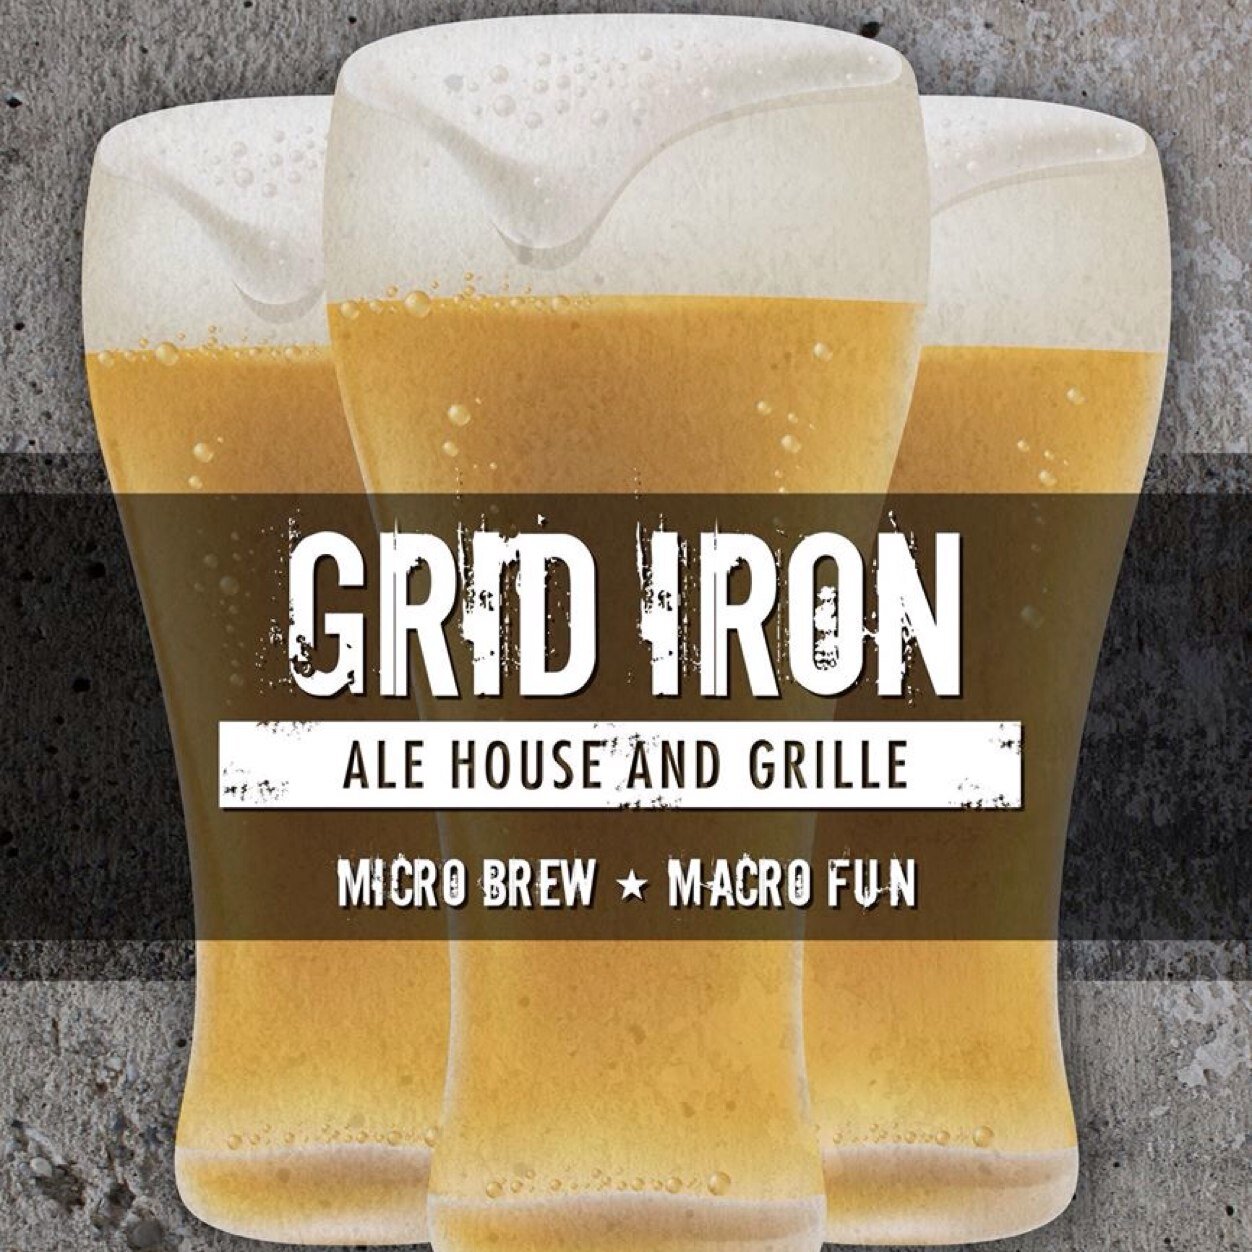 Grid Iron Ale House & Grille. A contemporary casual pub with all your favorite sports, events, drinks & delicious food including RI favorites. #WeFollowBackRI⚓️